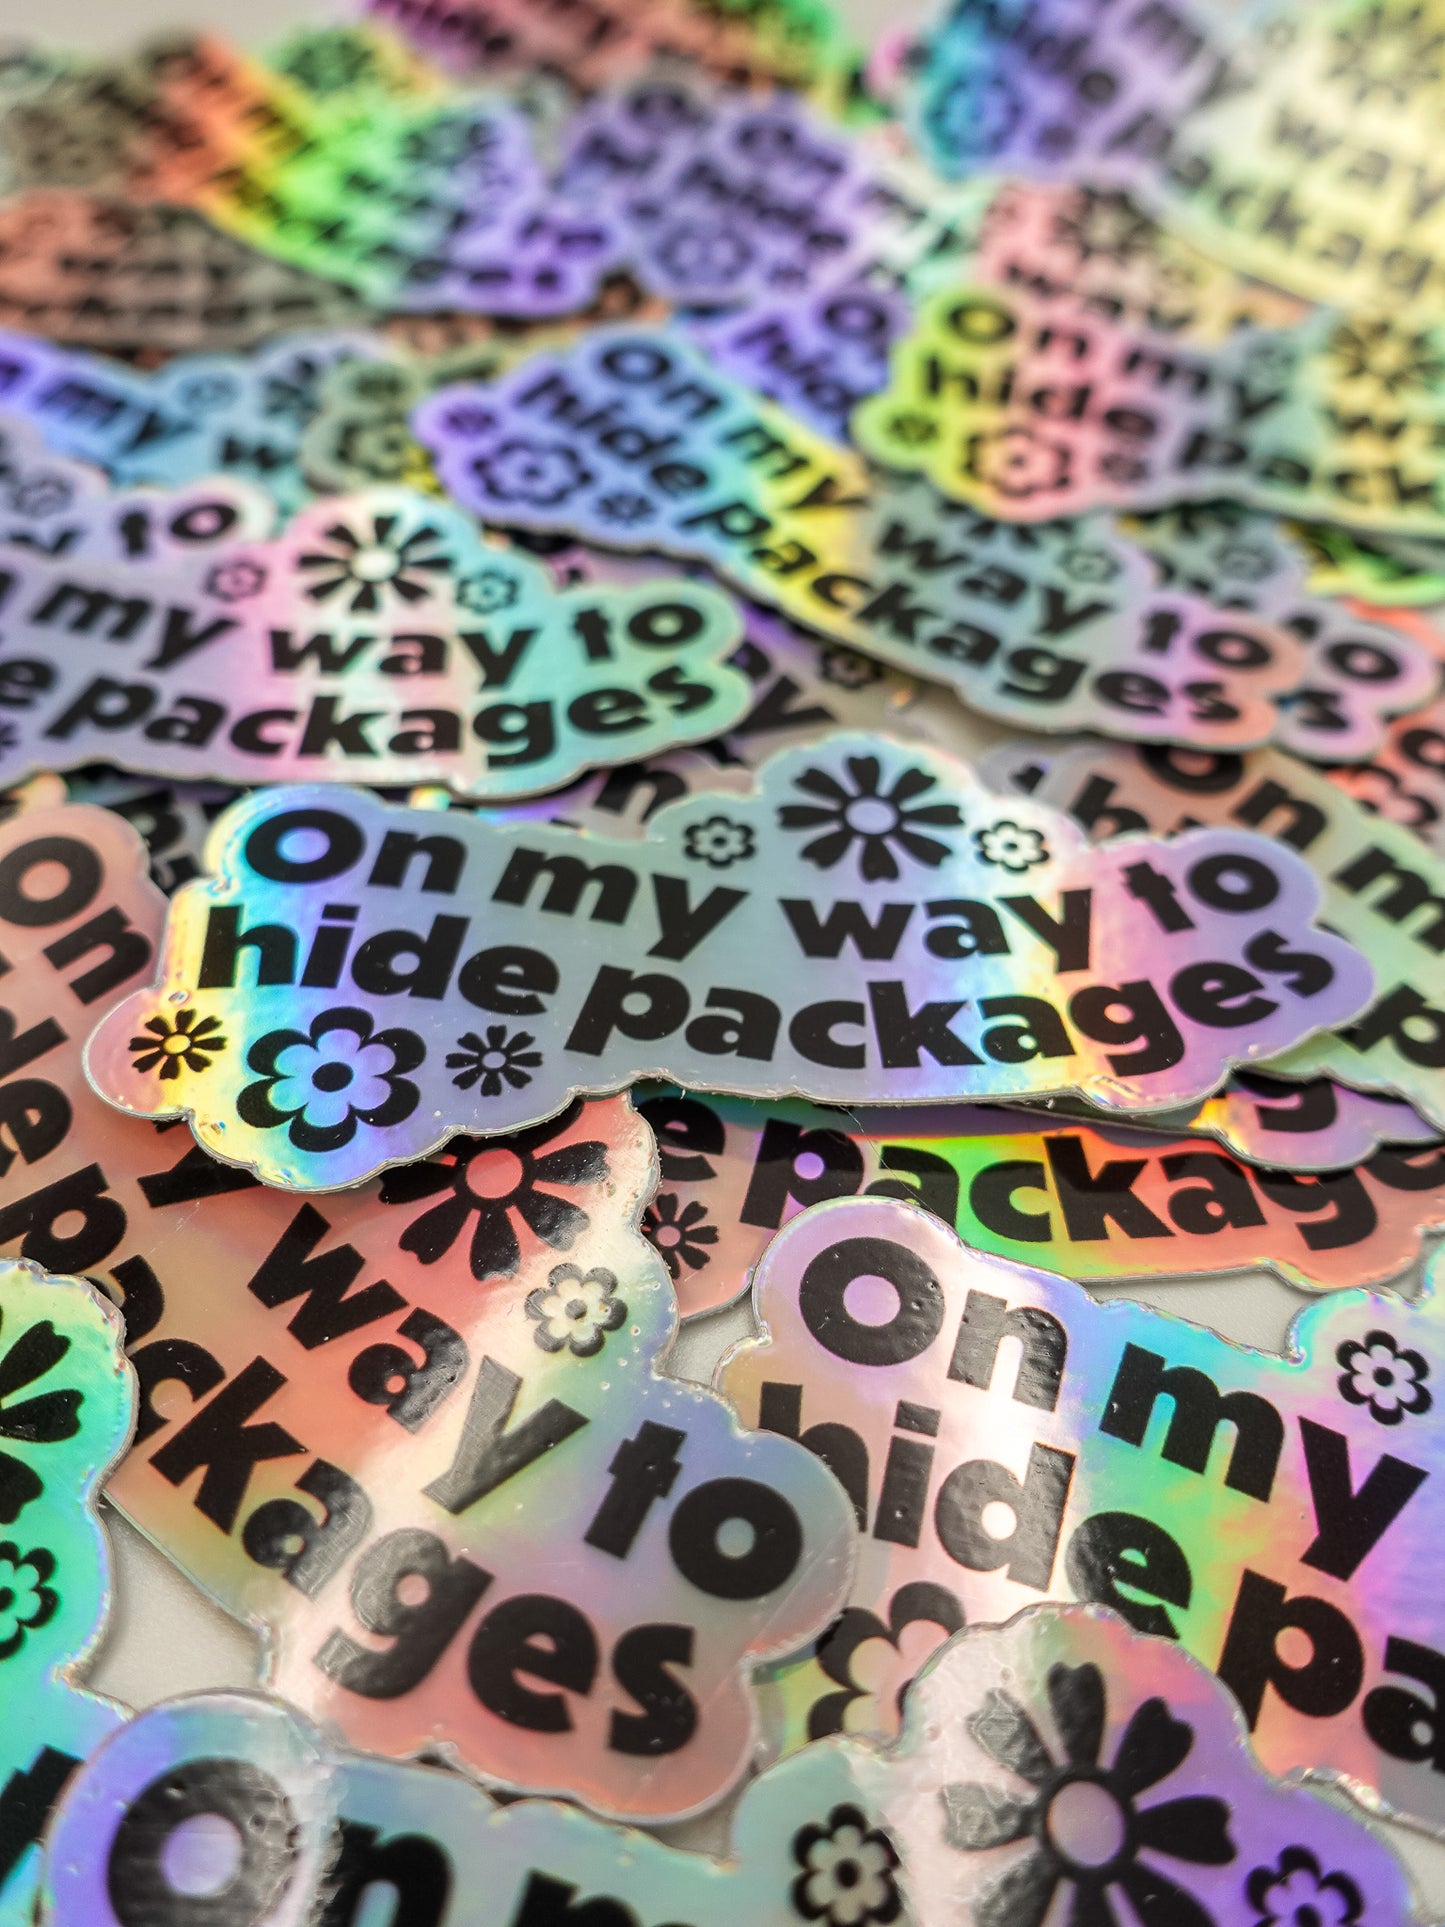 On my Way to Hide Packages - Sticker